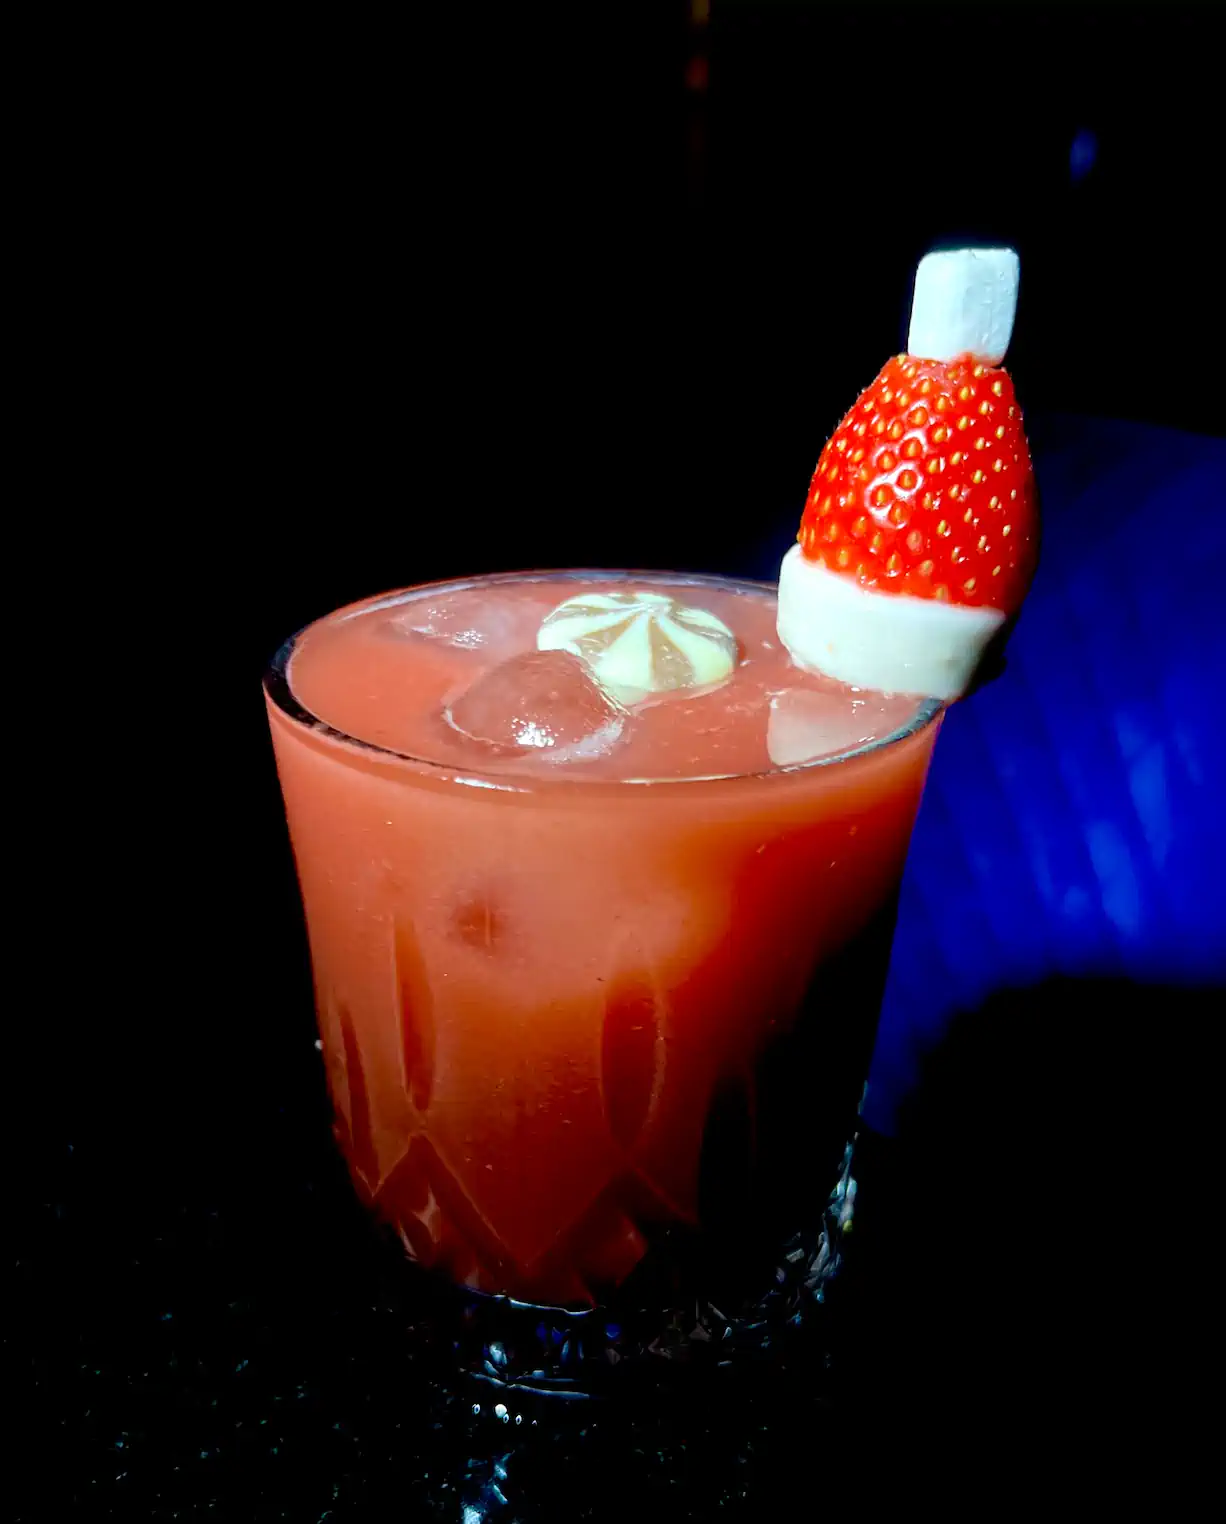 A glass of red drink with a strawberry on top.